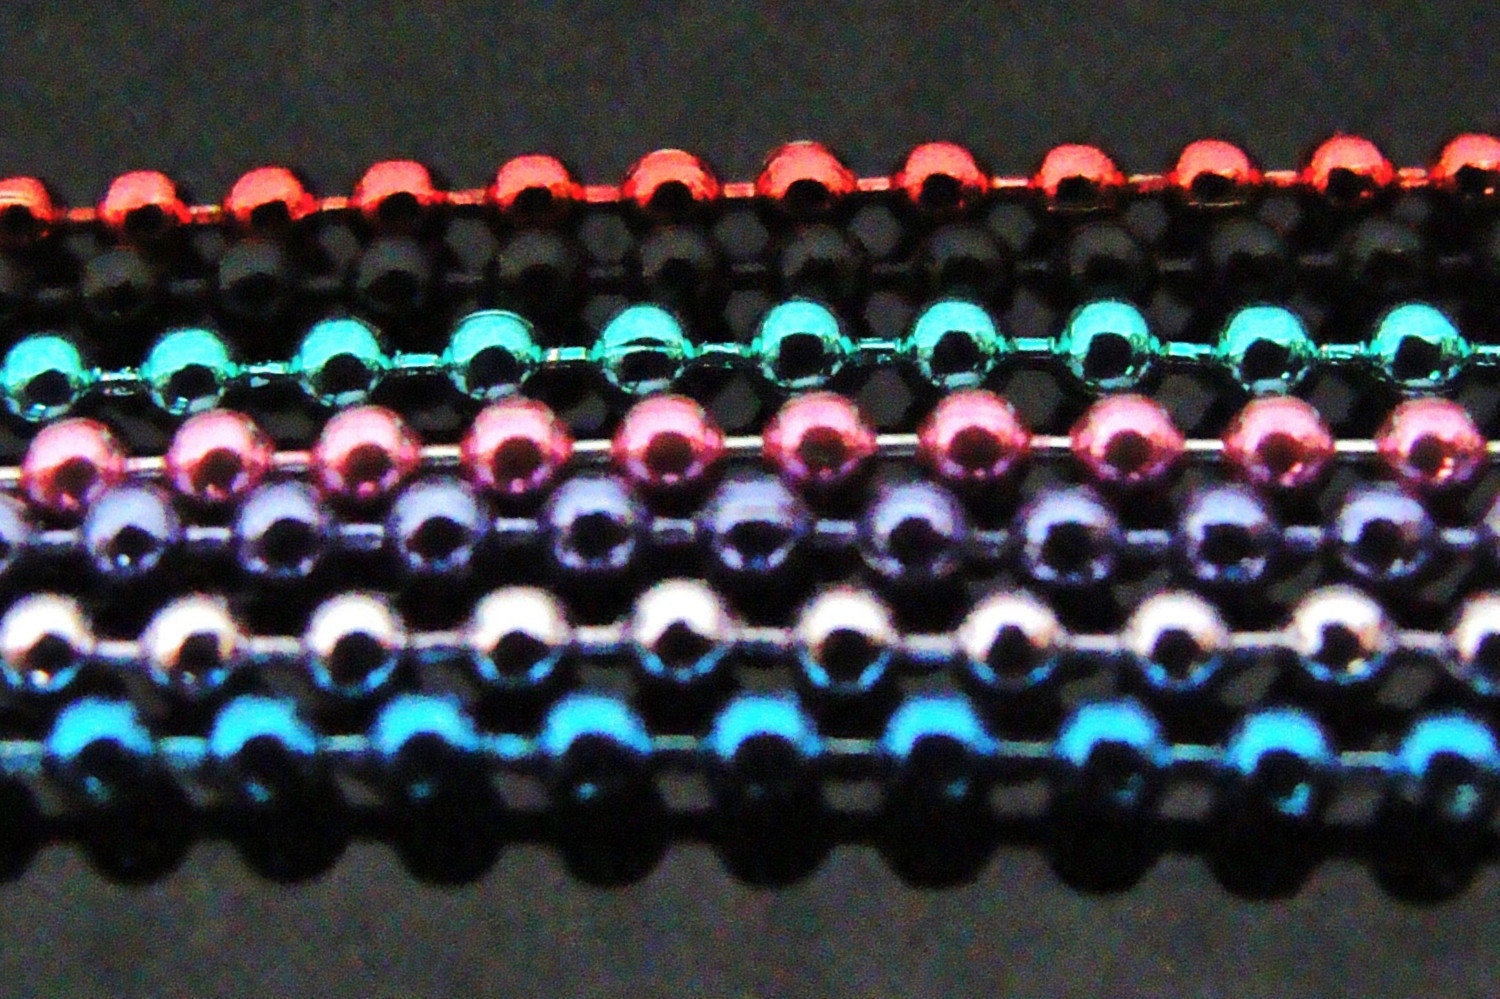 COLORFUL BALL CHAIN ----- 1.5MM BALL ------17 INCH --- PINK - BLUE - PURPLE - LILAC - BLACK  -RED  - GREEN